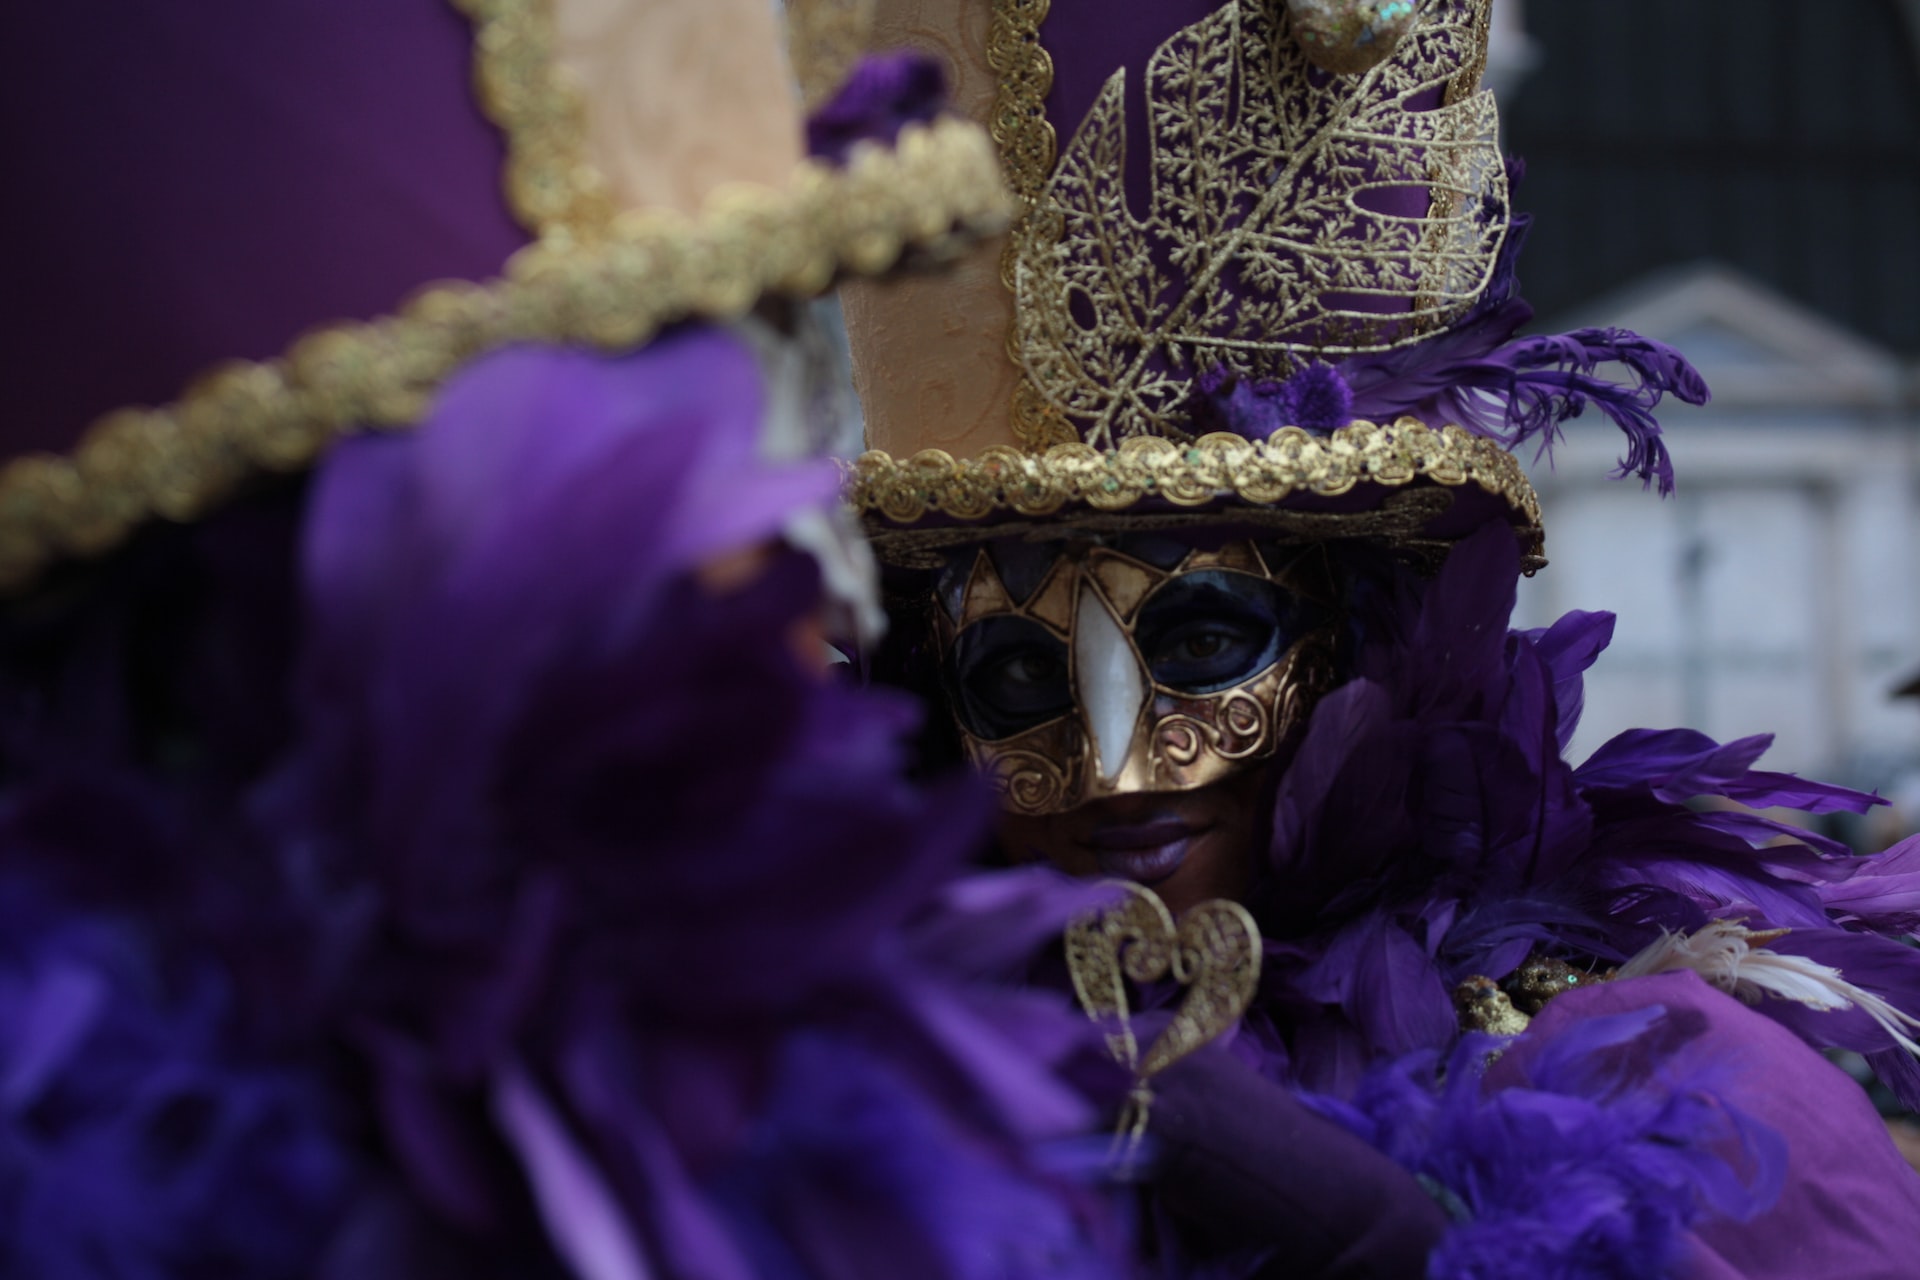 A woman wearing a purple and gold outfit and mask during Mardi Gras.